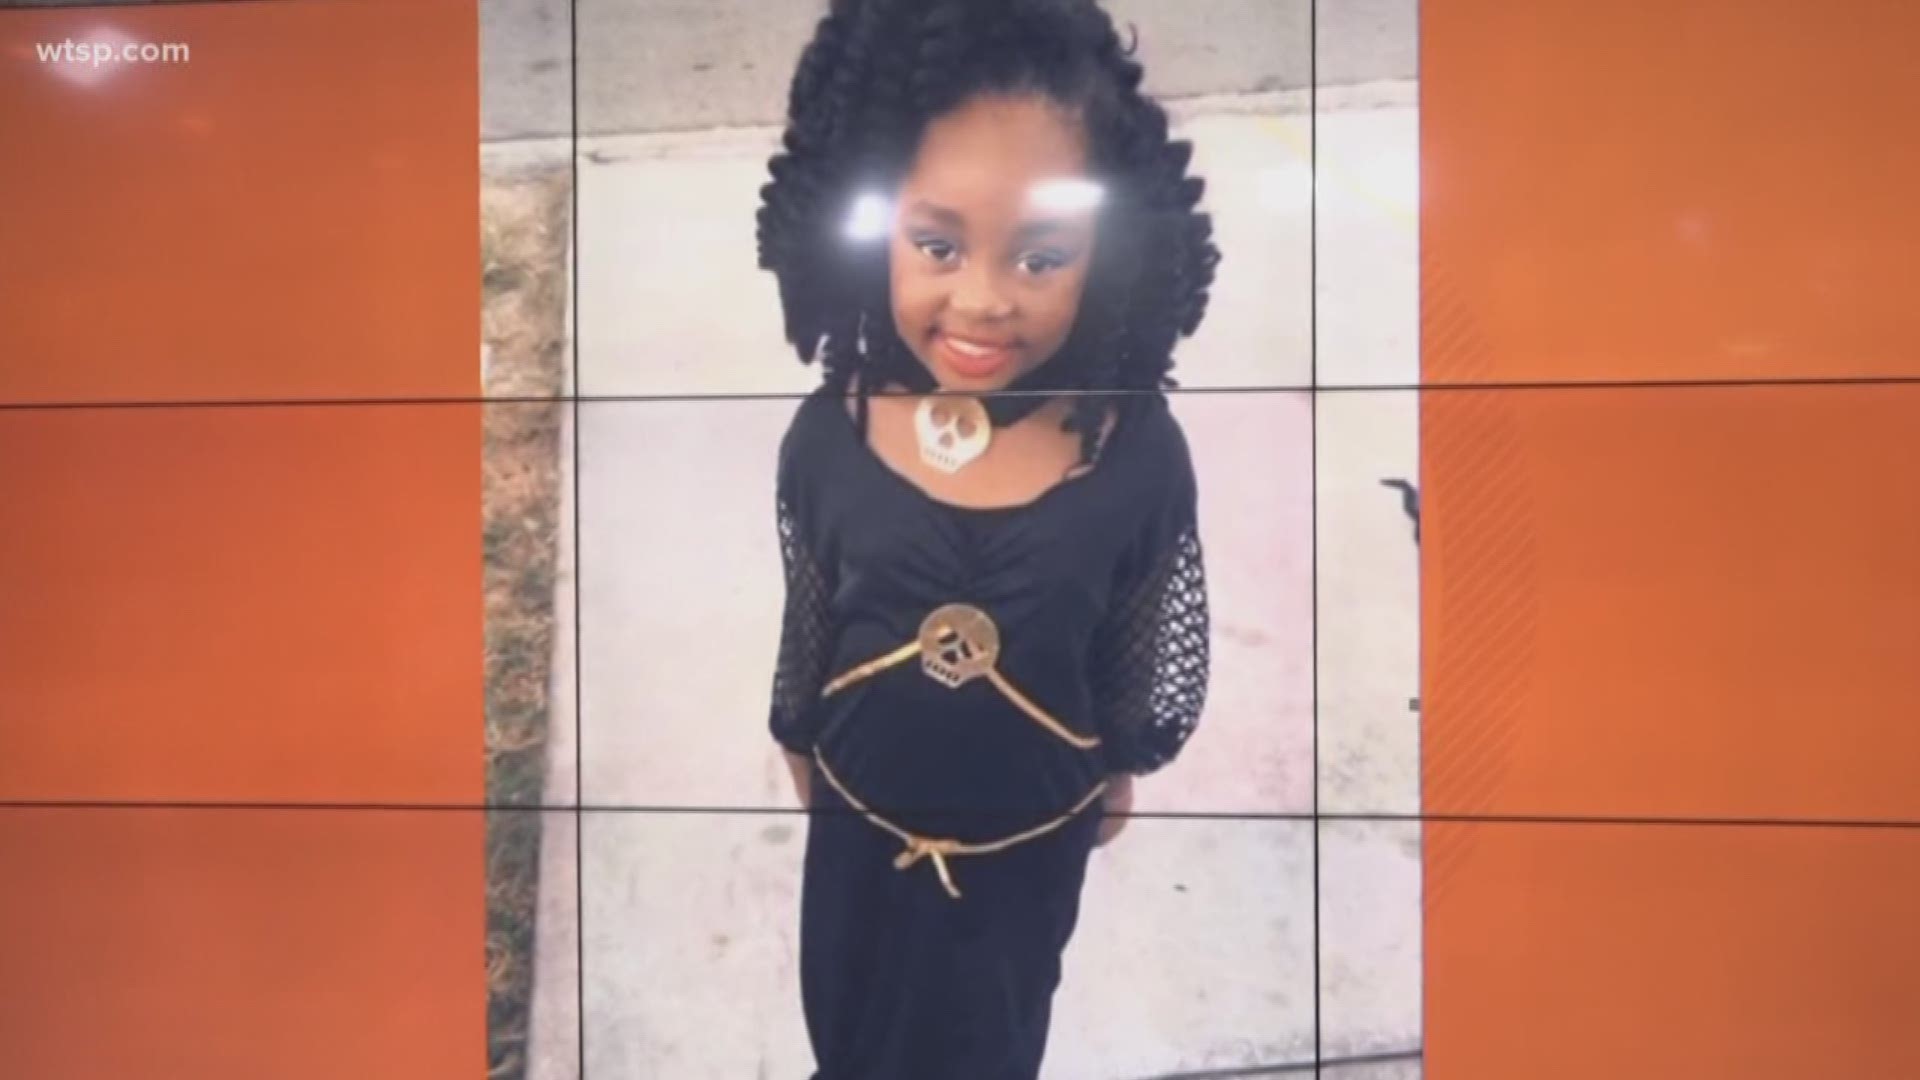 The girl Haines City police said was shot by her mom’s boyfriend Friday night has died at the hospital. Police said Elizabelle Frenel, 6, died from her injuries just before 11 p.m. Saturday.